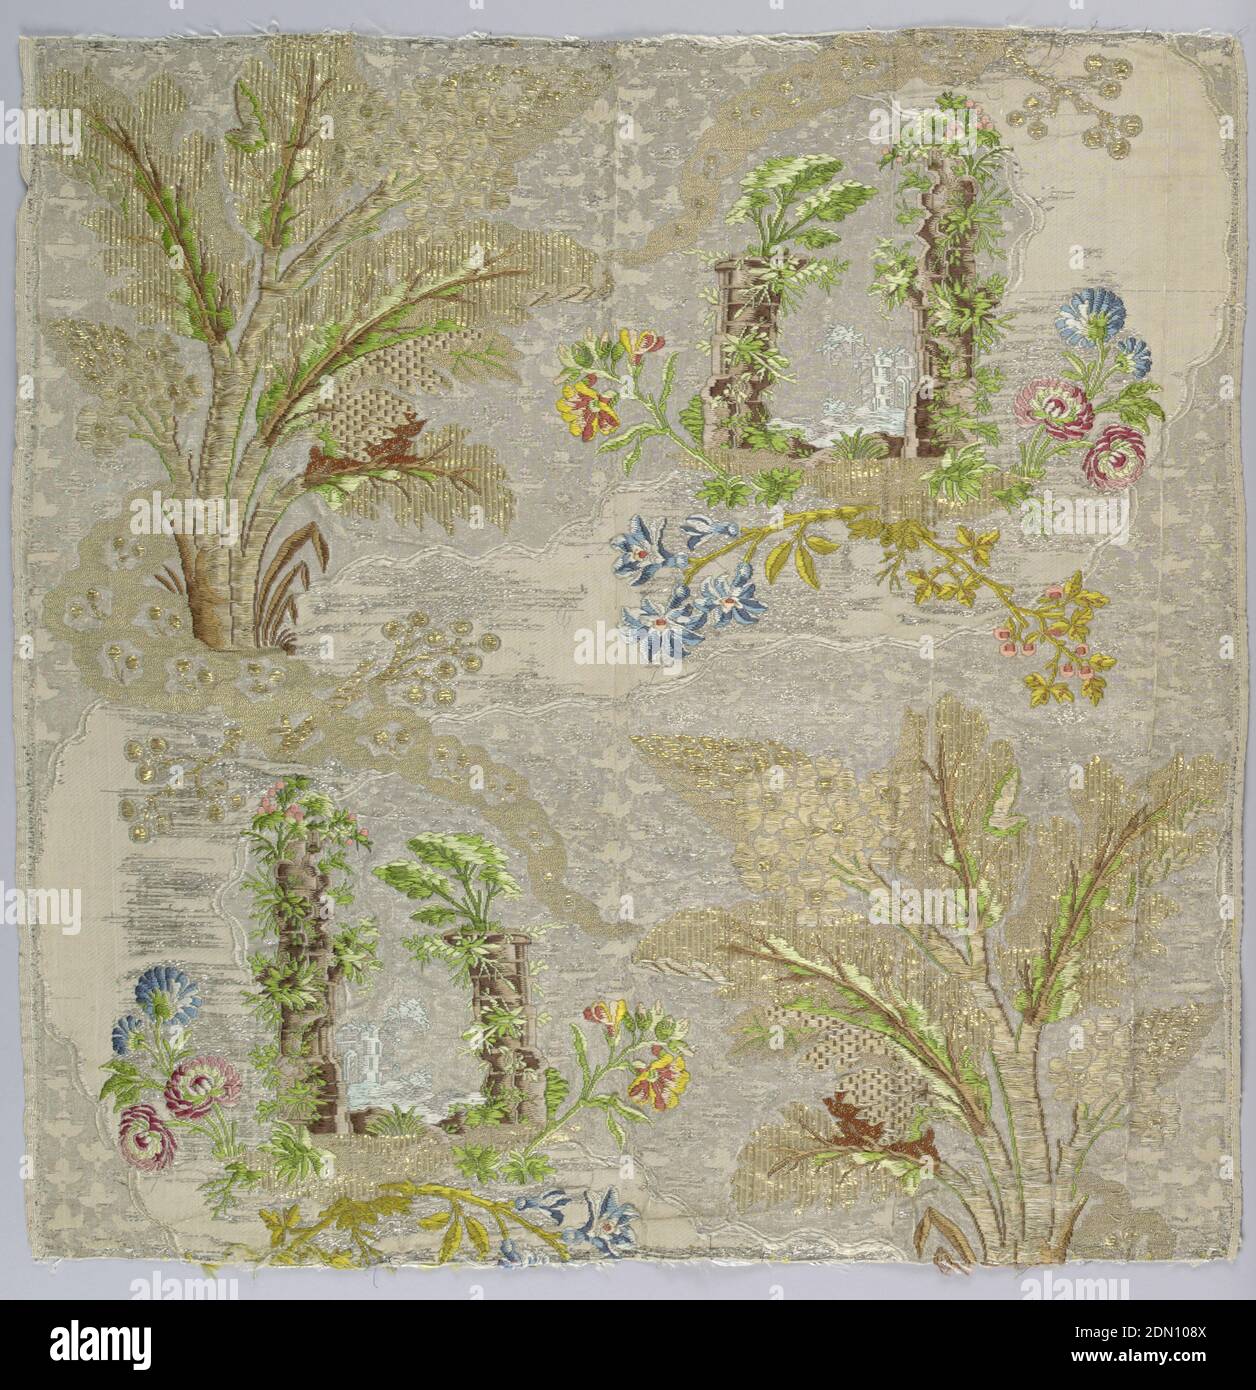 Fragment, Medium: silk, metallic thread Technique: twill weave with supplementary weft, Panel of cream and silver fabric heavily brocaded with gold thread and multicolored silks. Pattern has architectural ruins and flowers in the lower left and upper right corners while the lower right and upper left corners have trees with decorative foliage., France, 1700–1750, woven textiles, Fragment Stock Photo